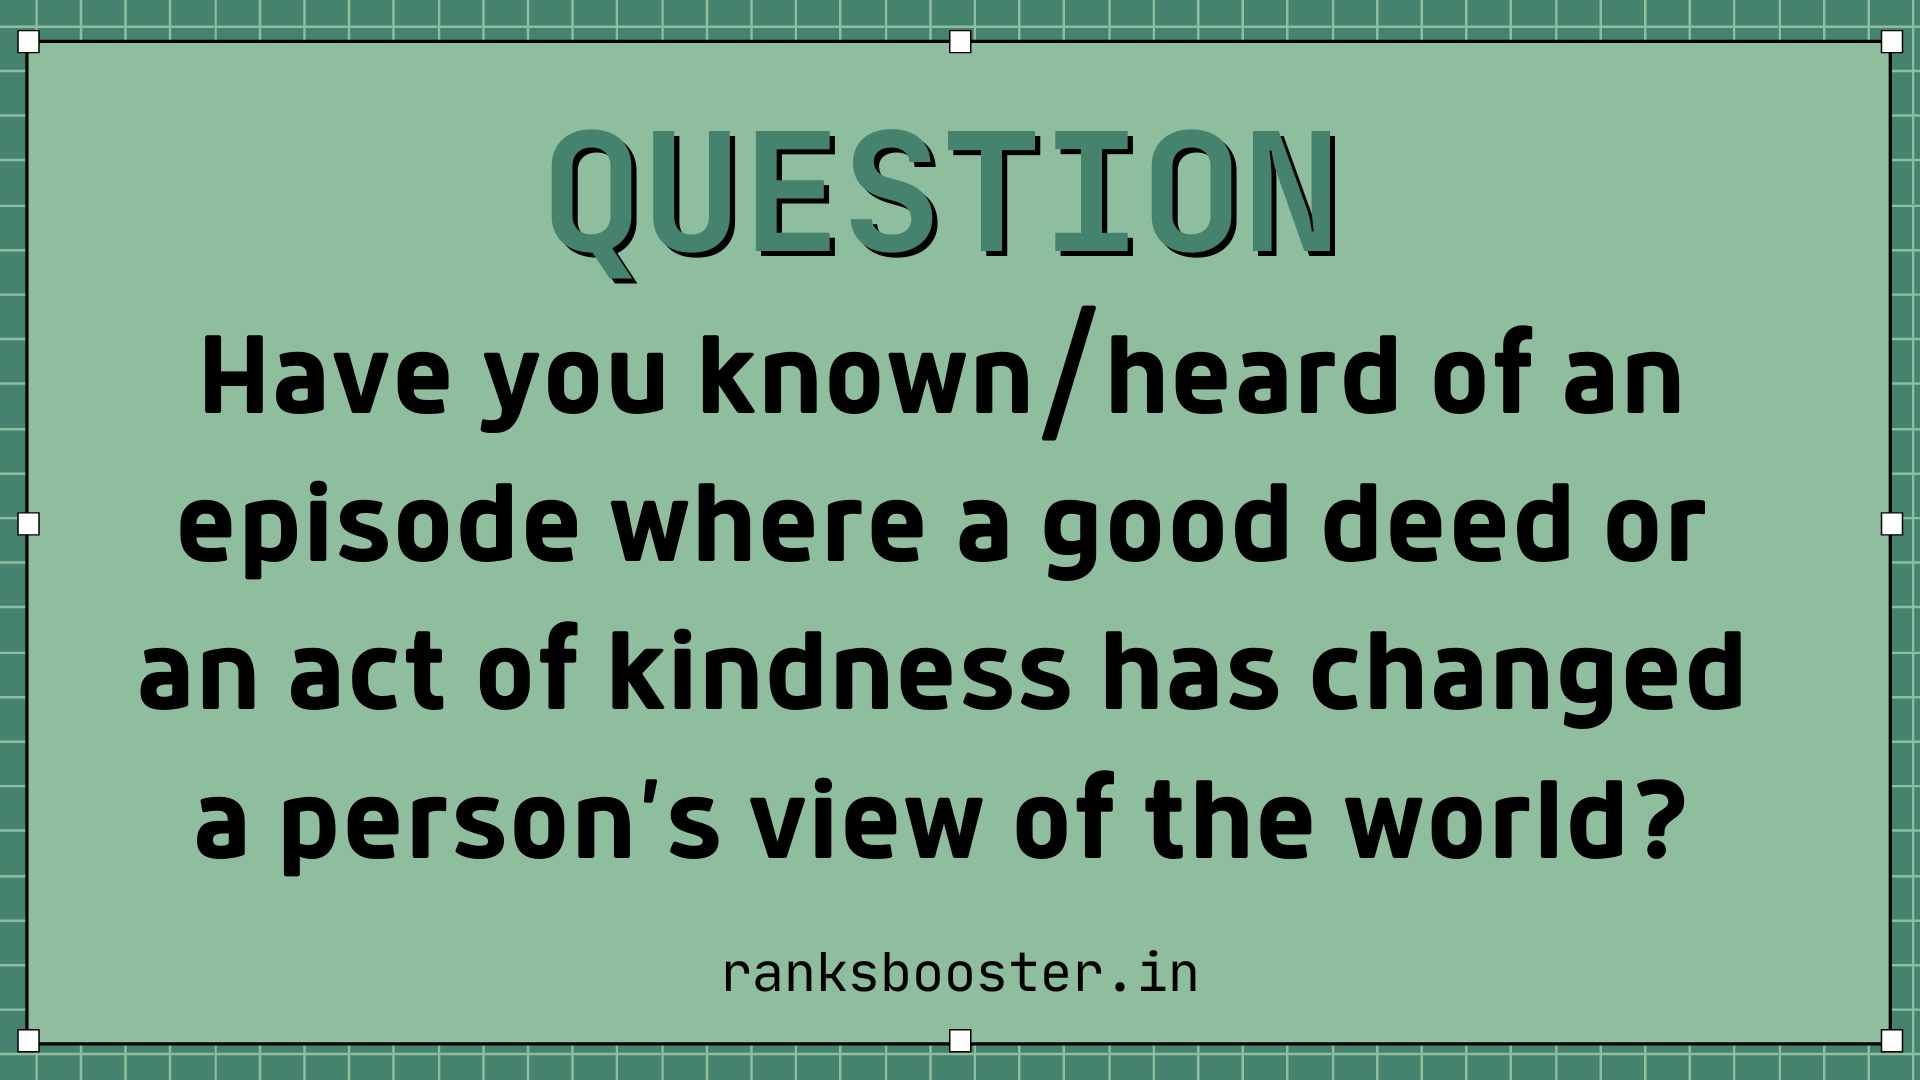 Have you known/heard of an episode where a good deed or an act of kindness has changed a person’s view of the world?